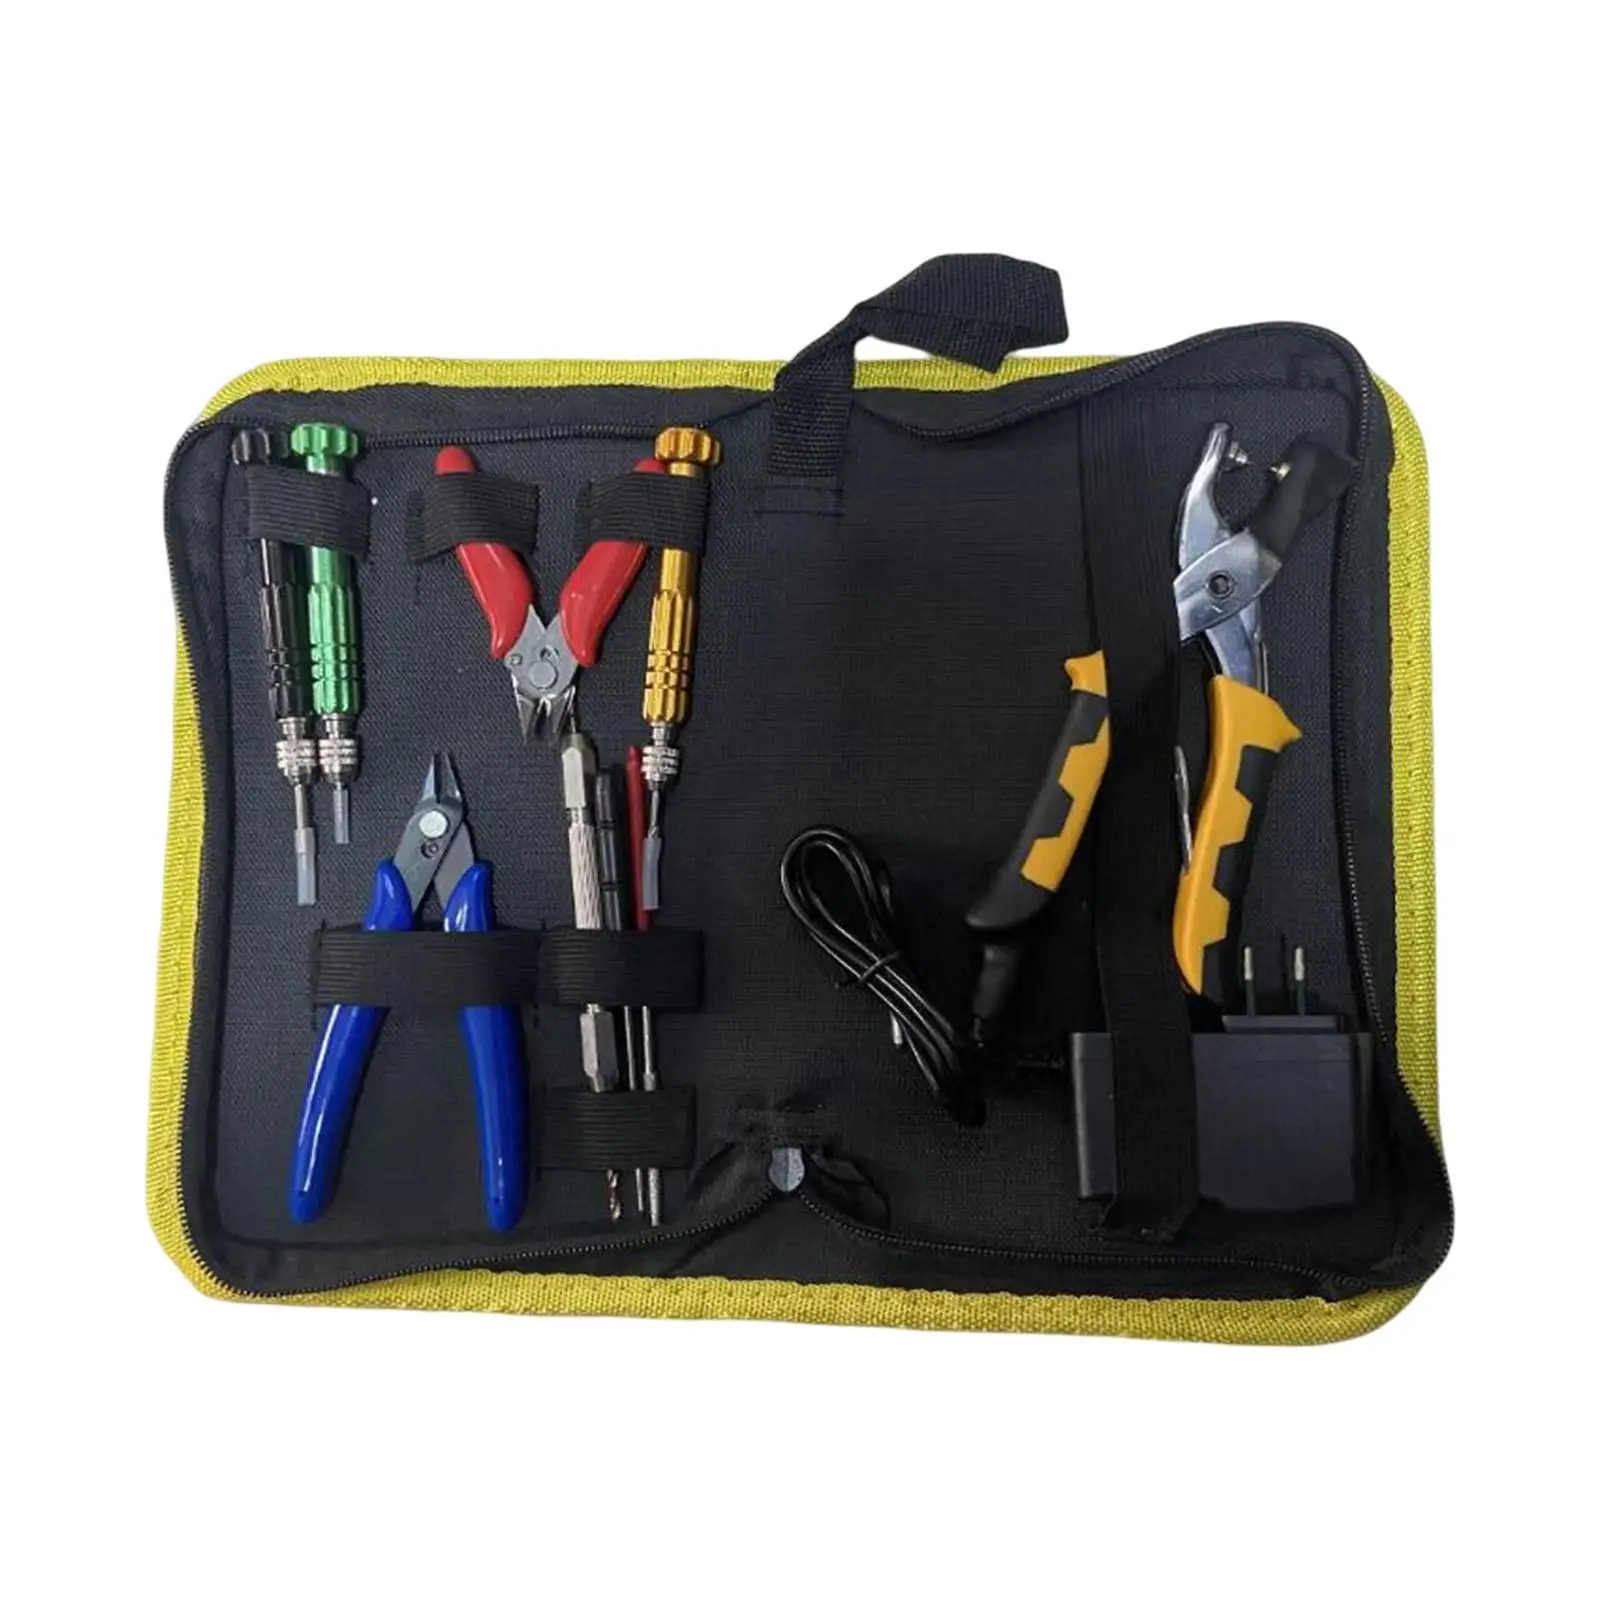 Starting Stringing Clamp Tool Kit Stringing Machine Tools Professional Metal Cold Press Badminton Racket Pliers for Outdoor